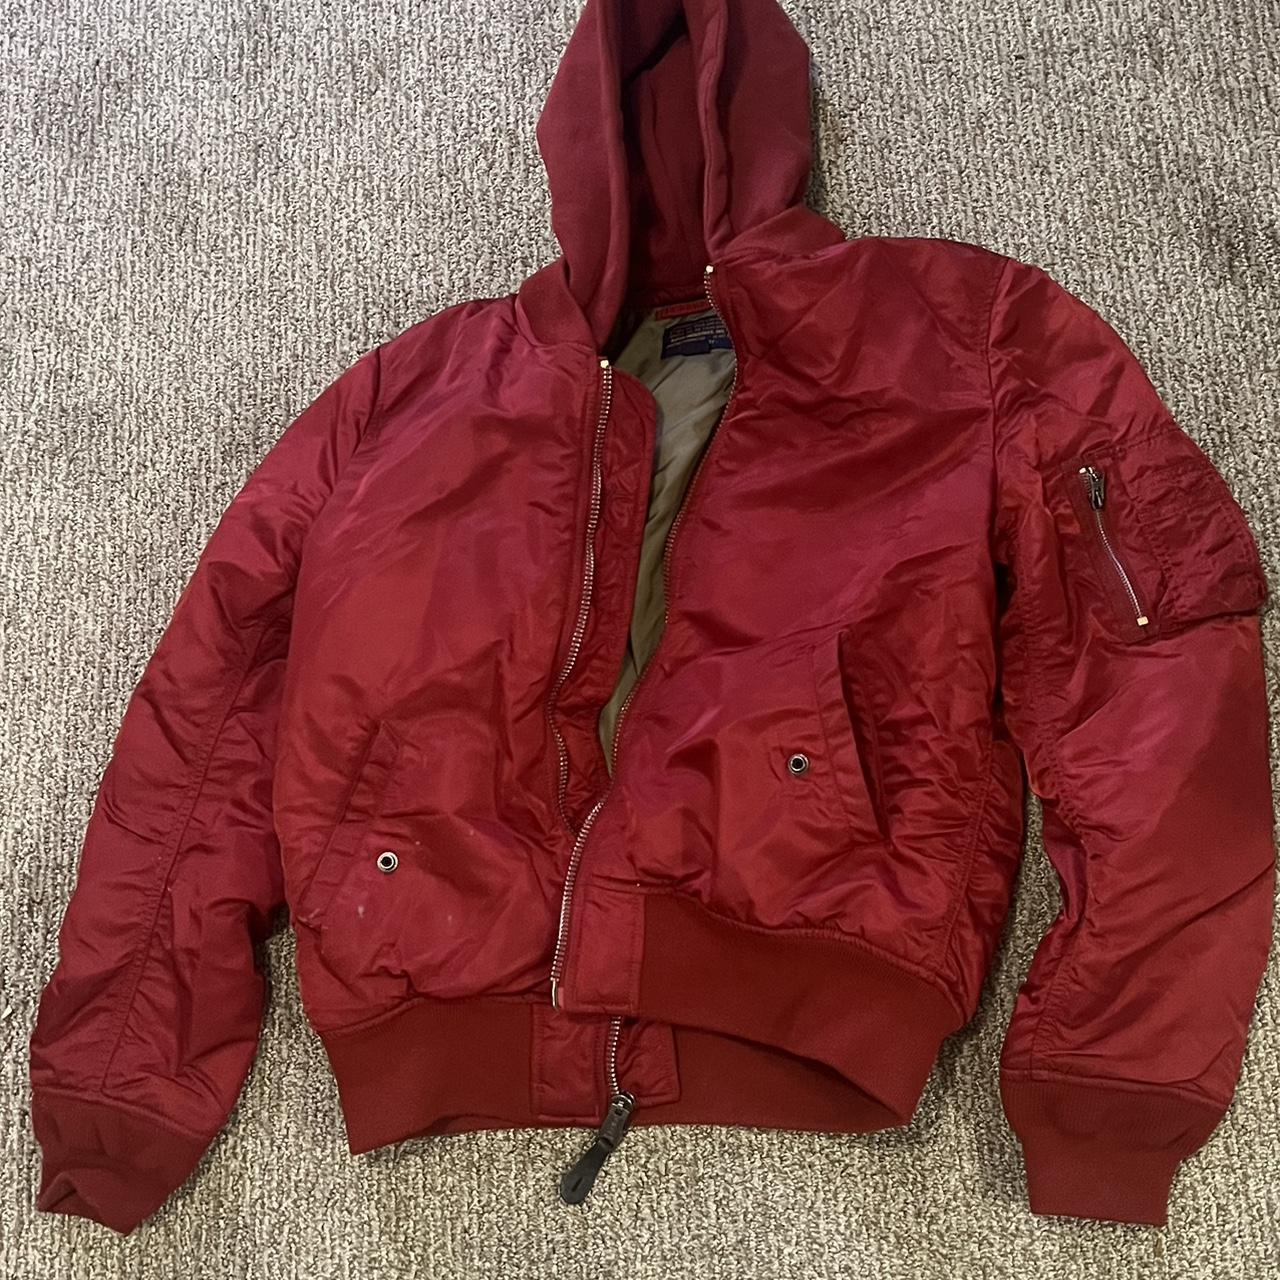 Alpha Industries Men's Burgundy and Red Jacket